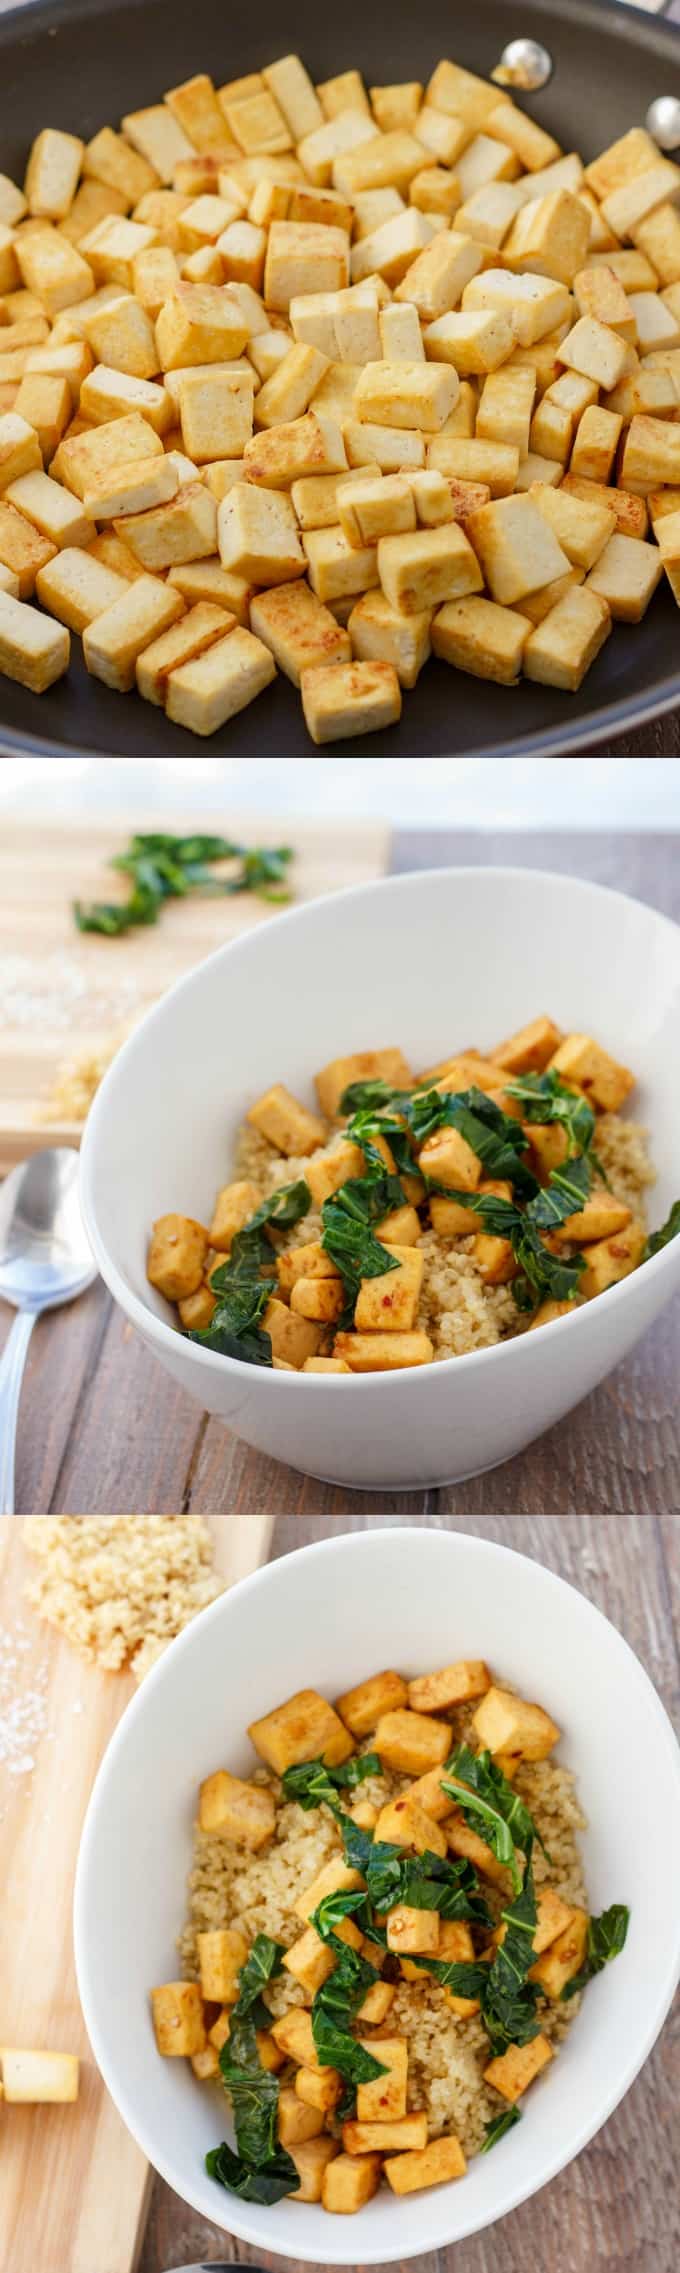 Sweet and Tangy Tofu with Greens over Quinoa in pot, white bowlon table #dinner